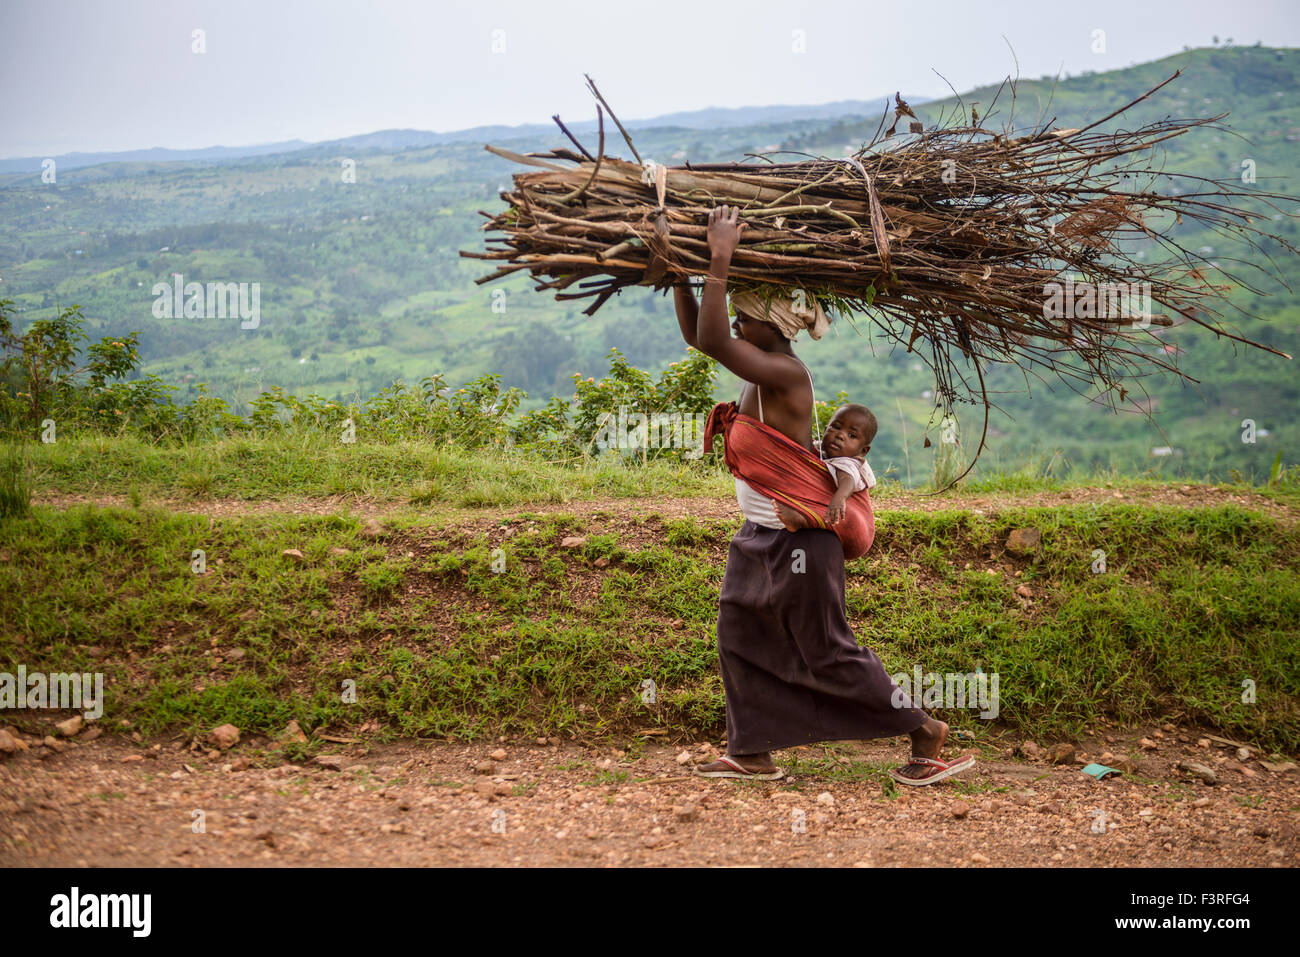 Woman with baby carries branches on head, Uganda, Africa Stock Photo